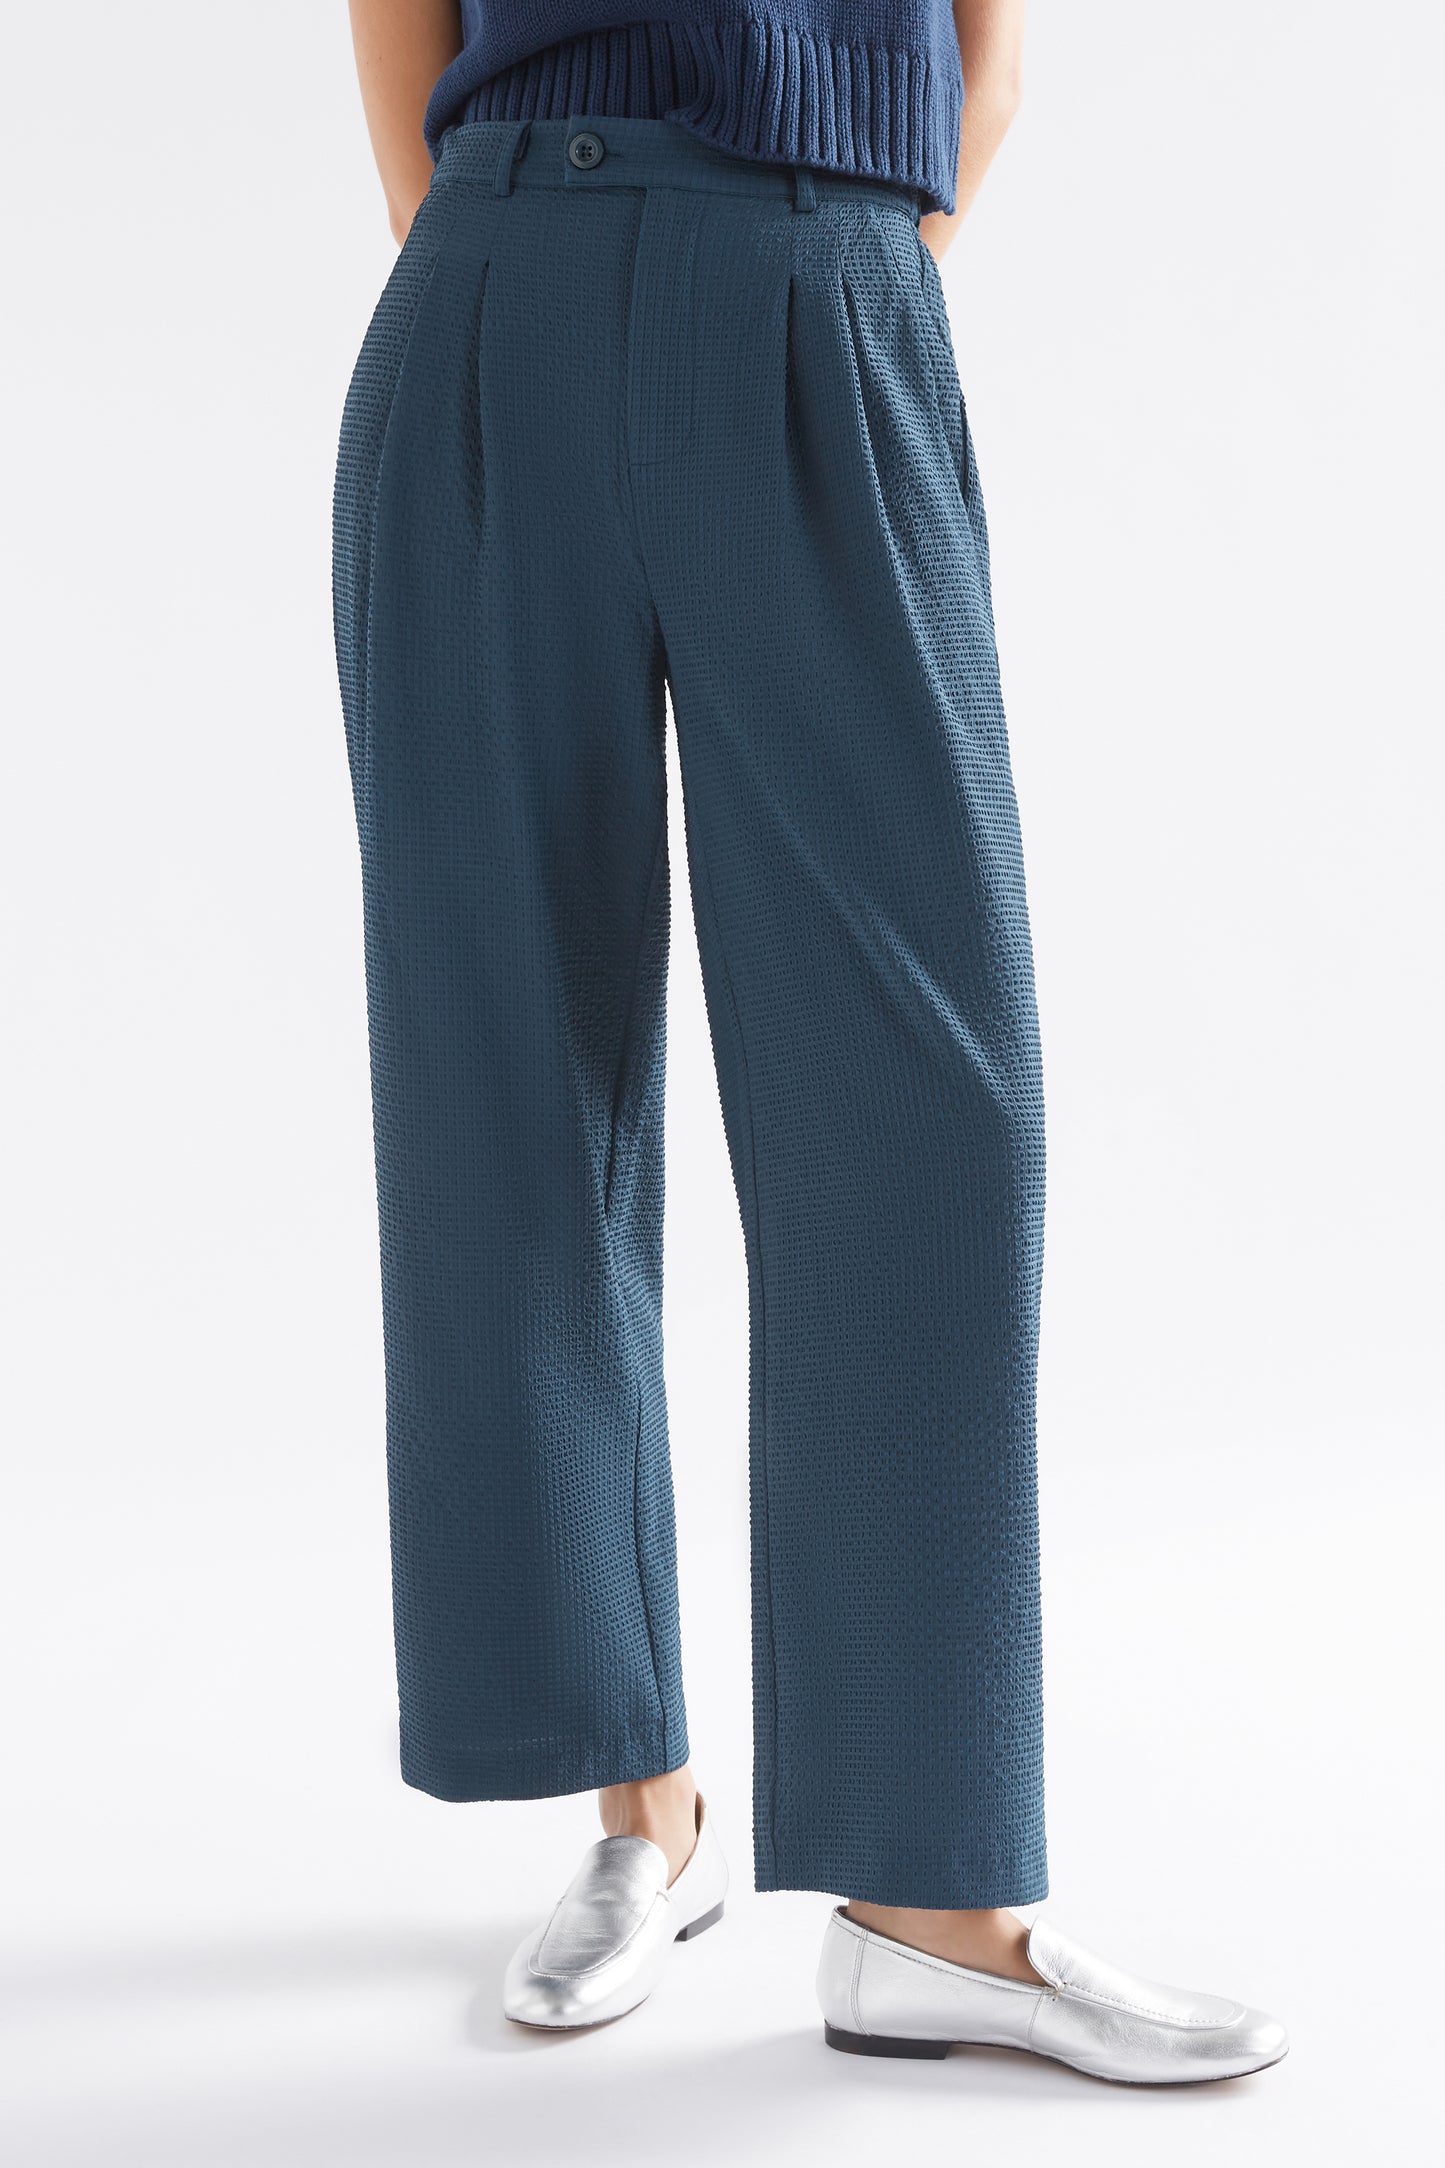 Deor Front Pleat Straight Leg Textured Pant Model Front cropped | DEEP SEA BLUE 